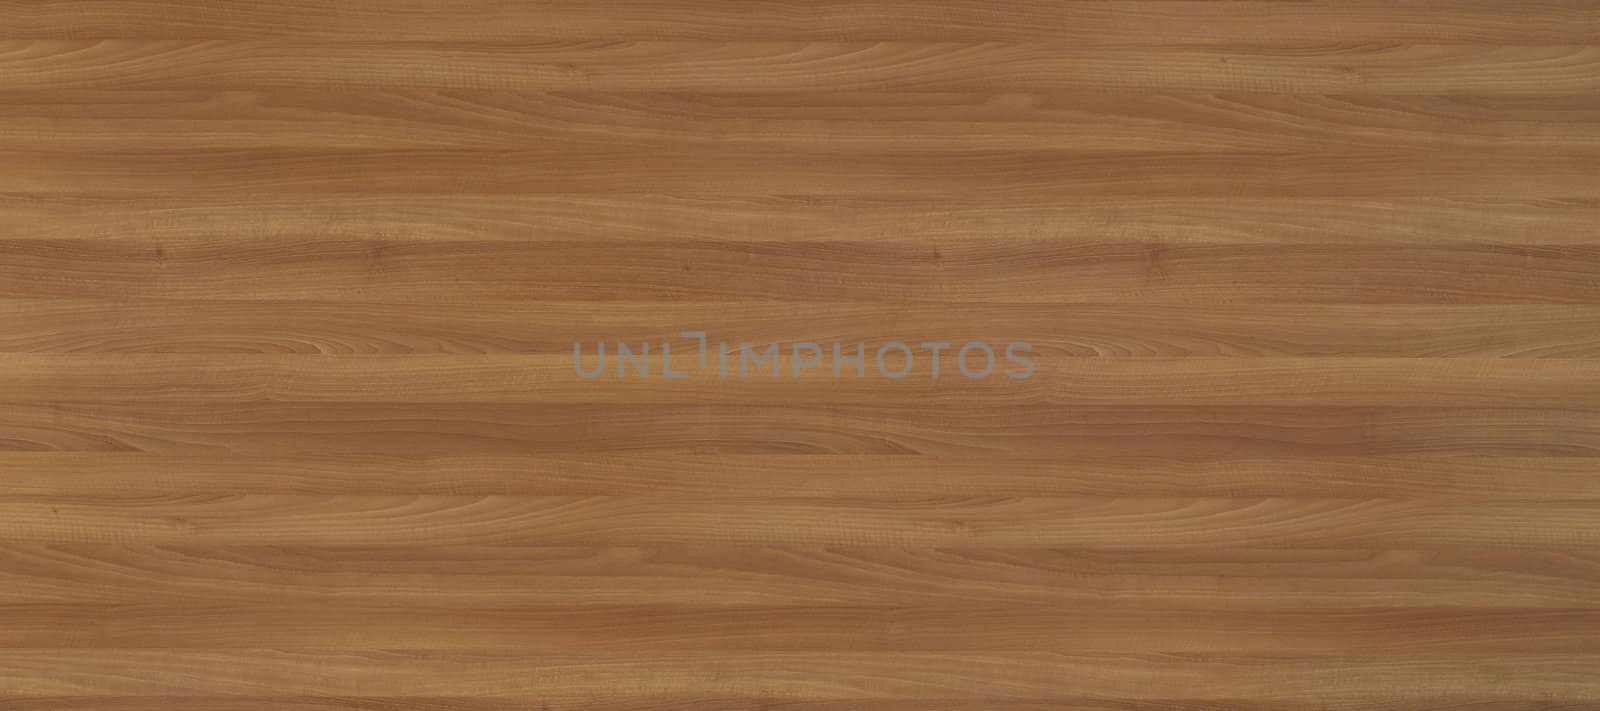 Texture of wood background by Baltus